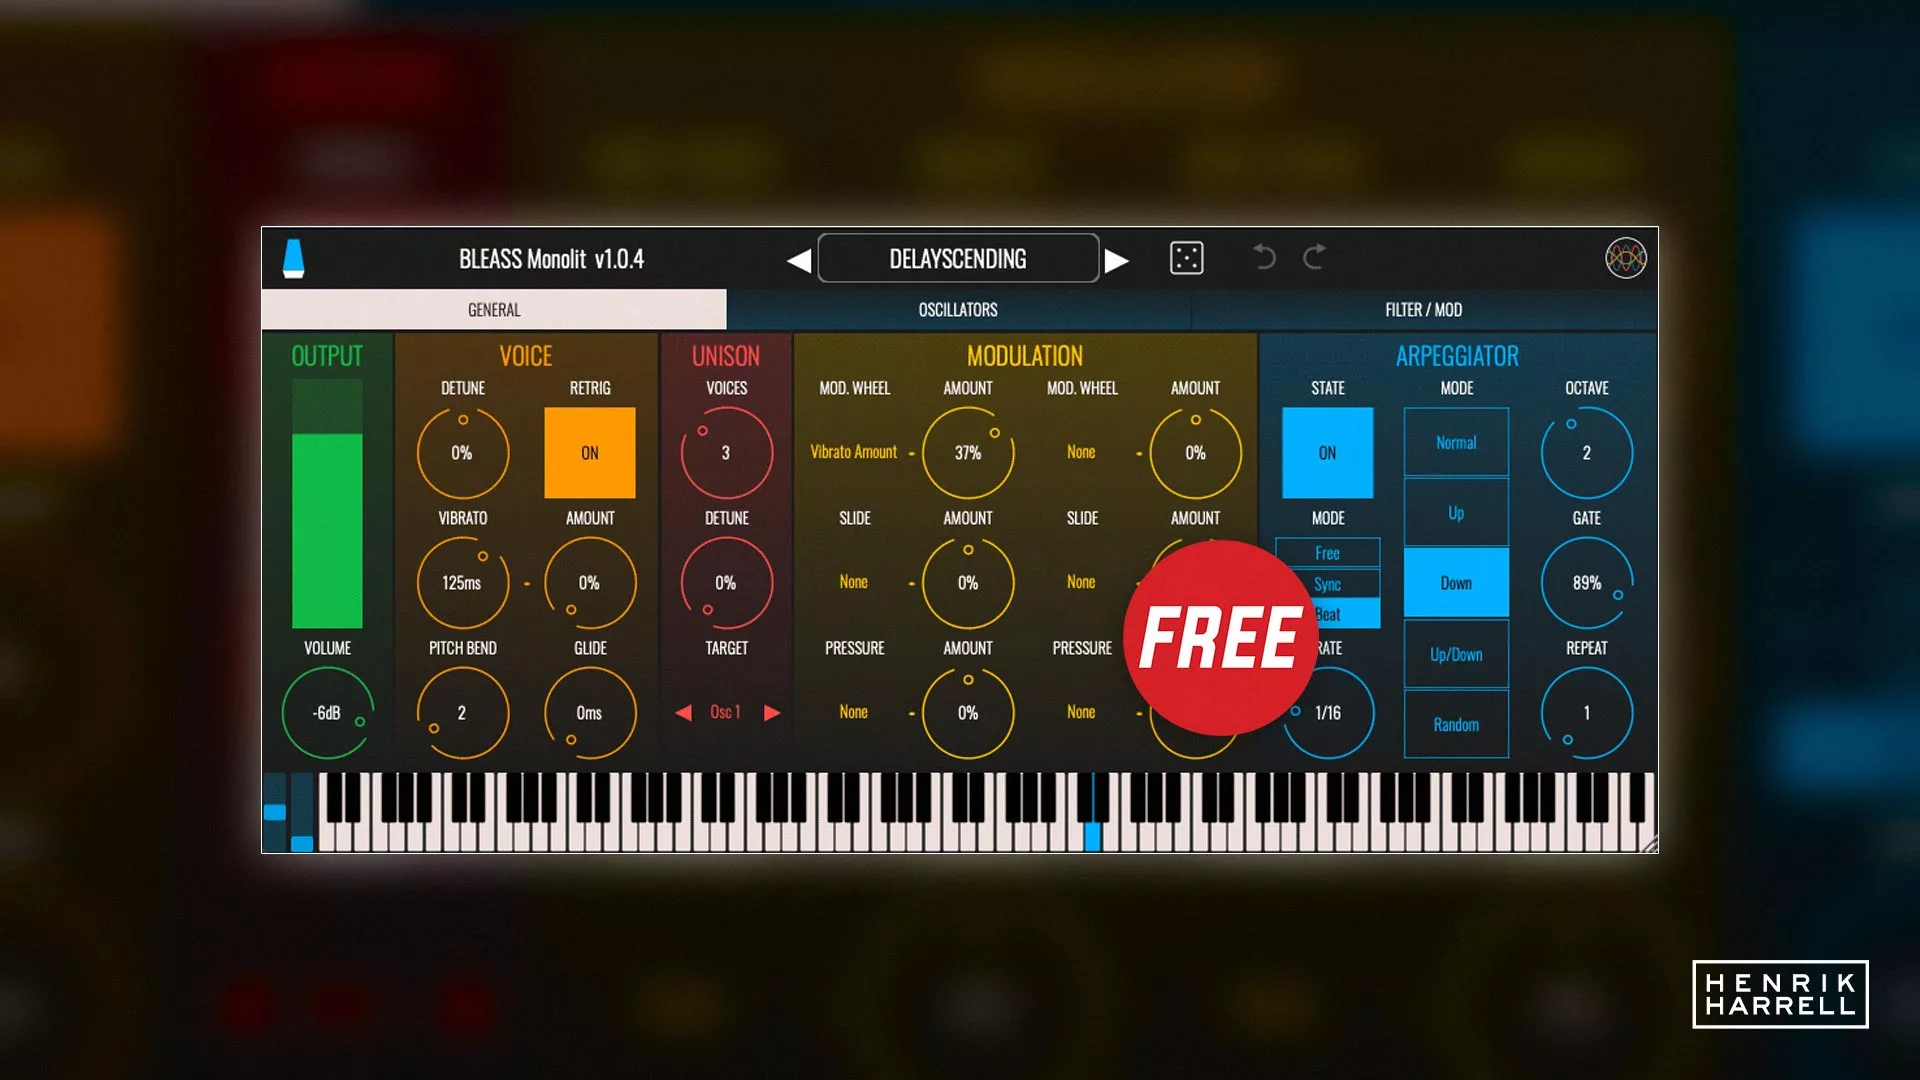 Bleass Releases Monolit, a Free Monophonic Synth Plugin